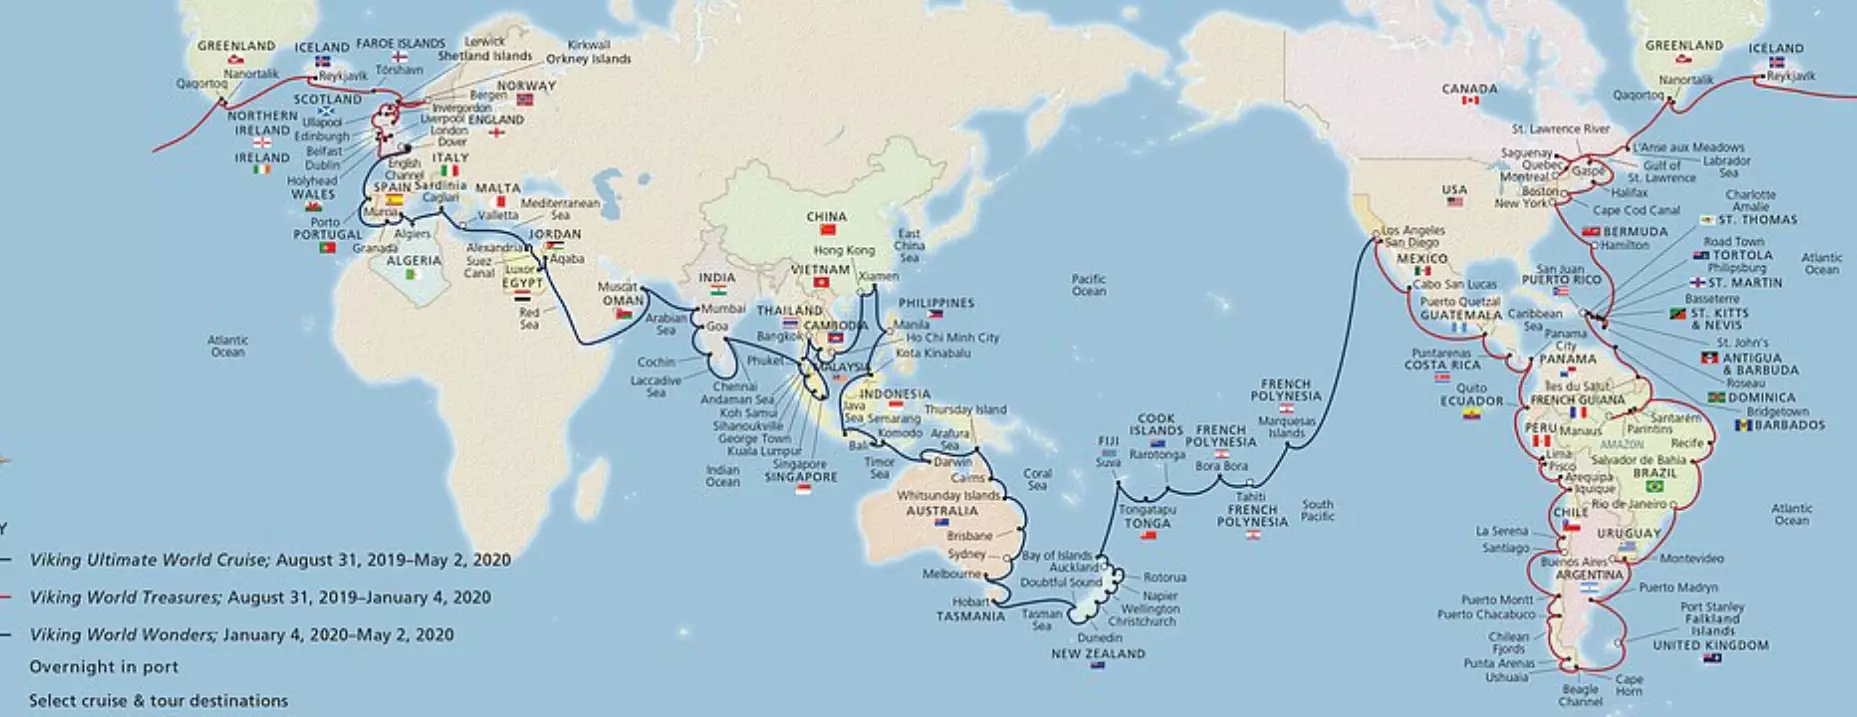 The route for the record-breaking 245-day voyage.